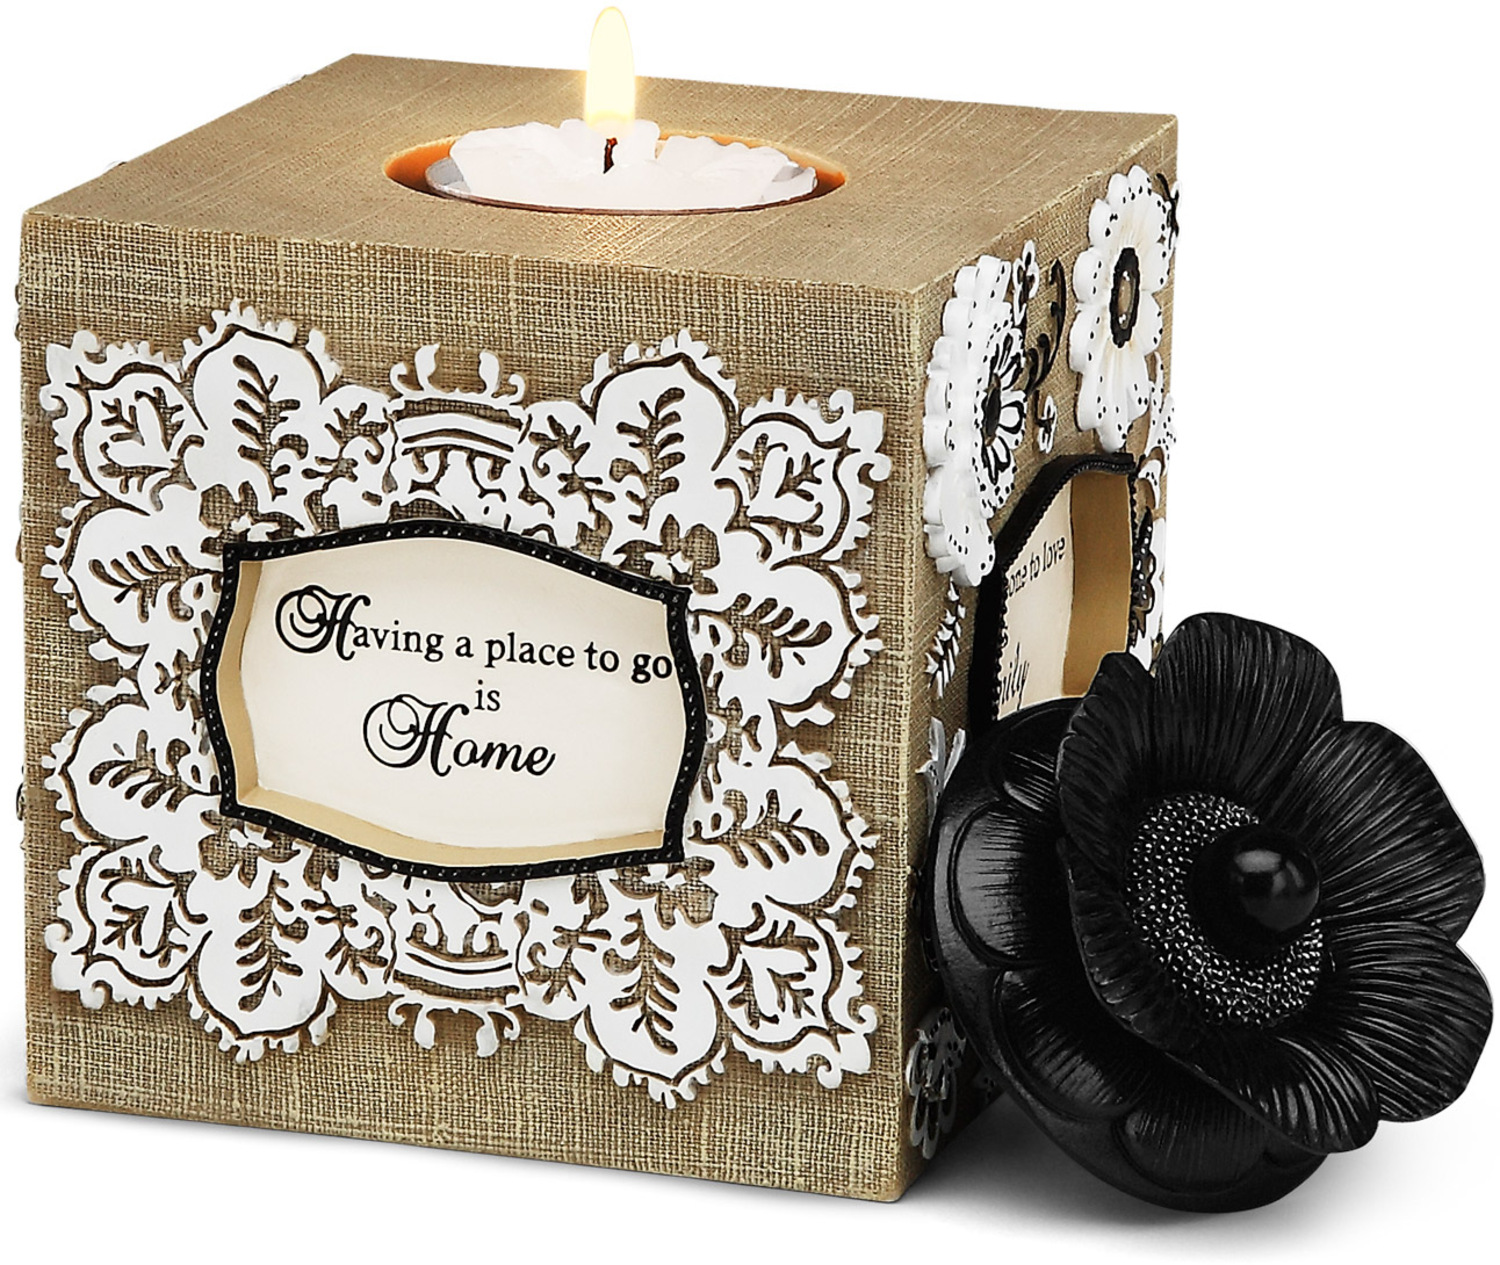 Blessing by Modeles - Blessing - 4.5" Square Candle Holder